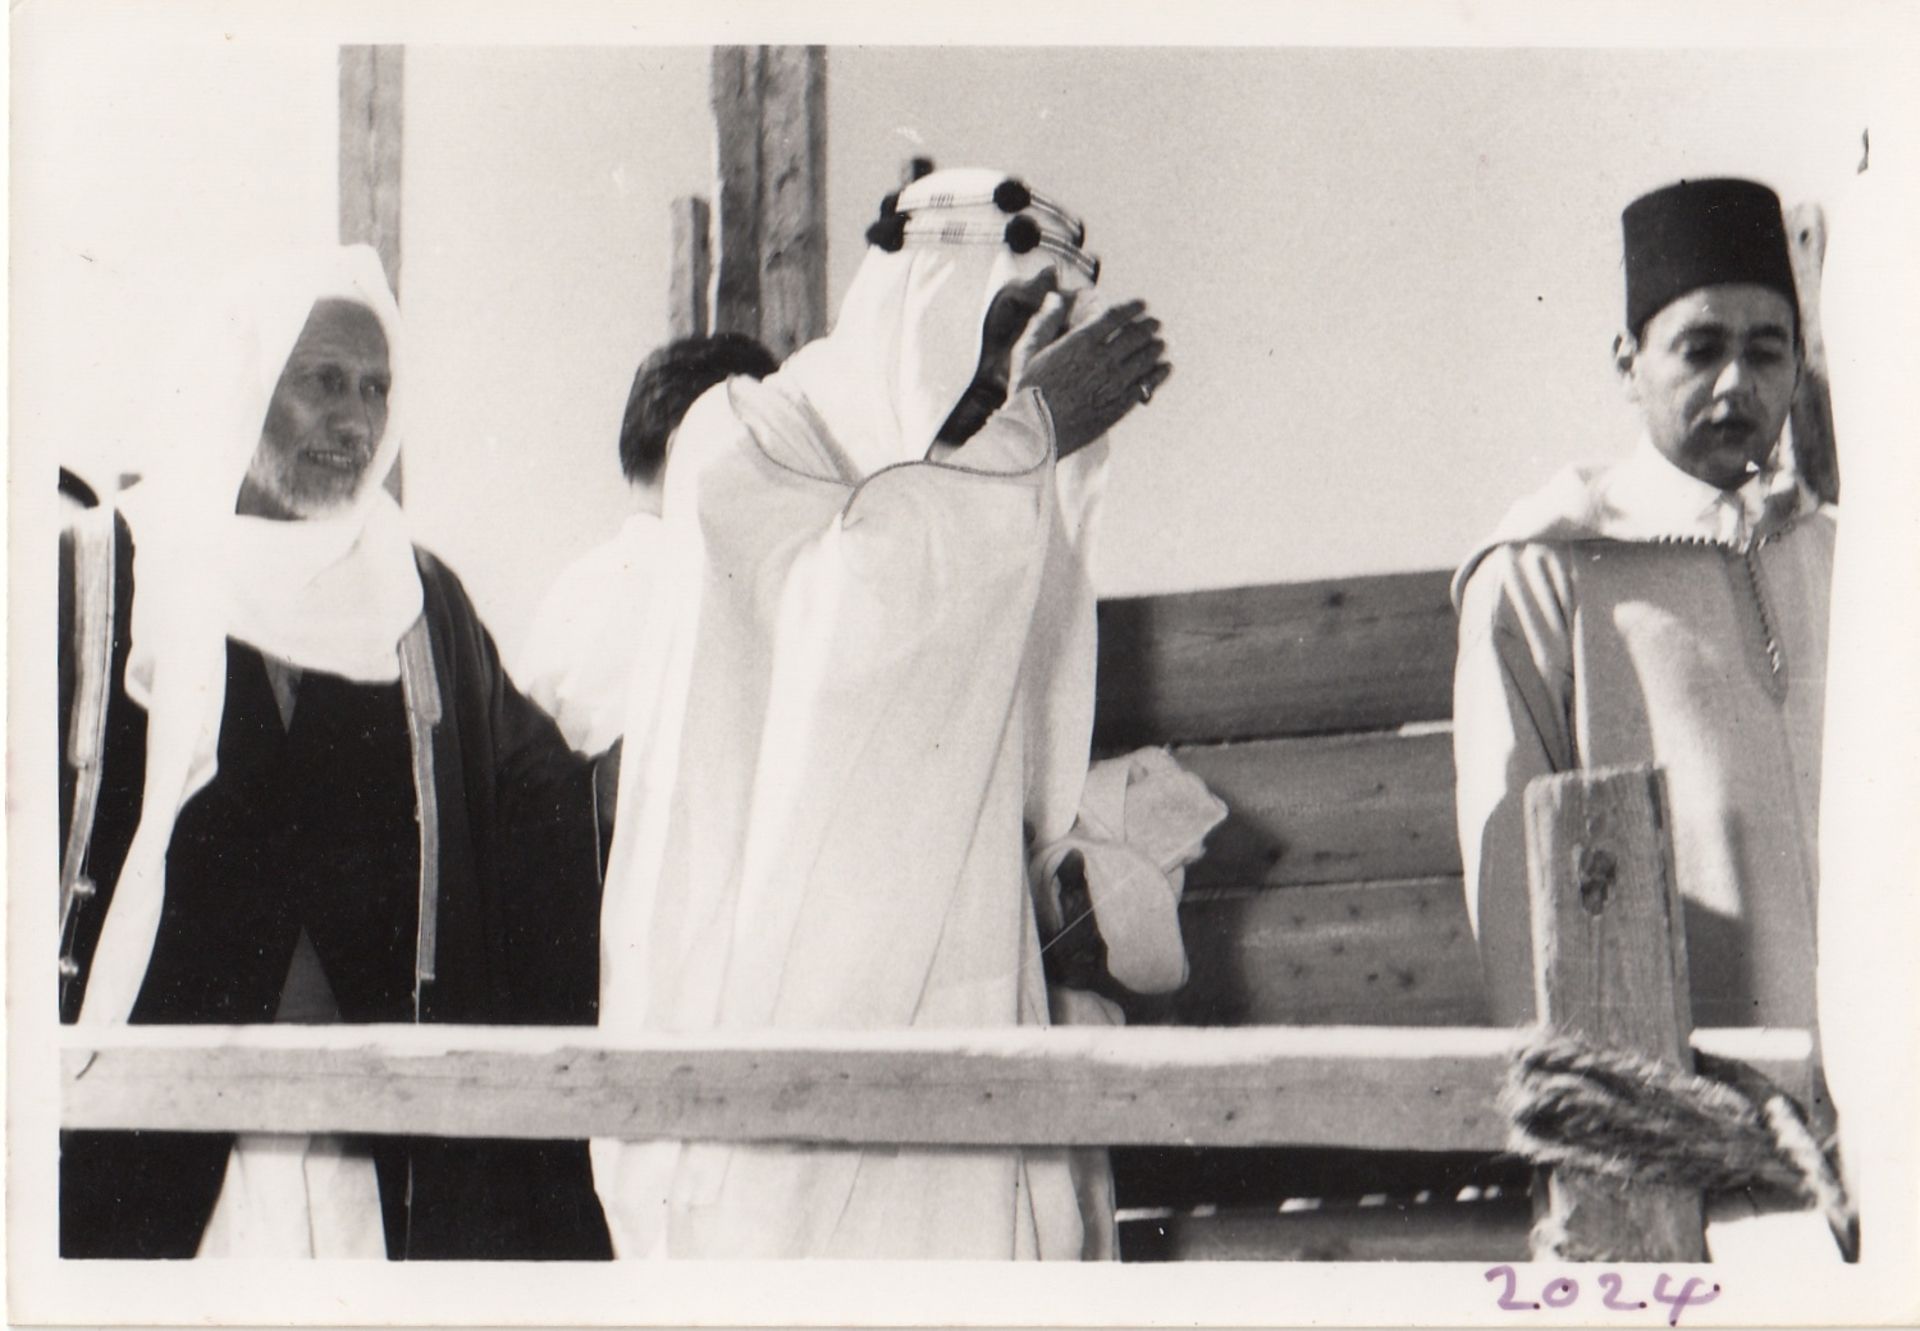 A COLLECTION OF PHOTOGRAPHS OF HIS MAJESTY KING FAISAL BIN ABDUL AZIZ VISITING THE GRAND MOSQUES OF